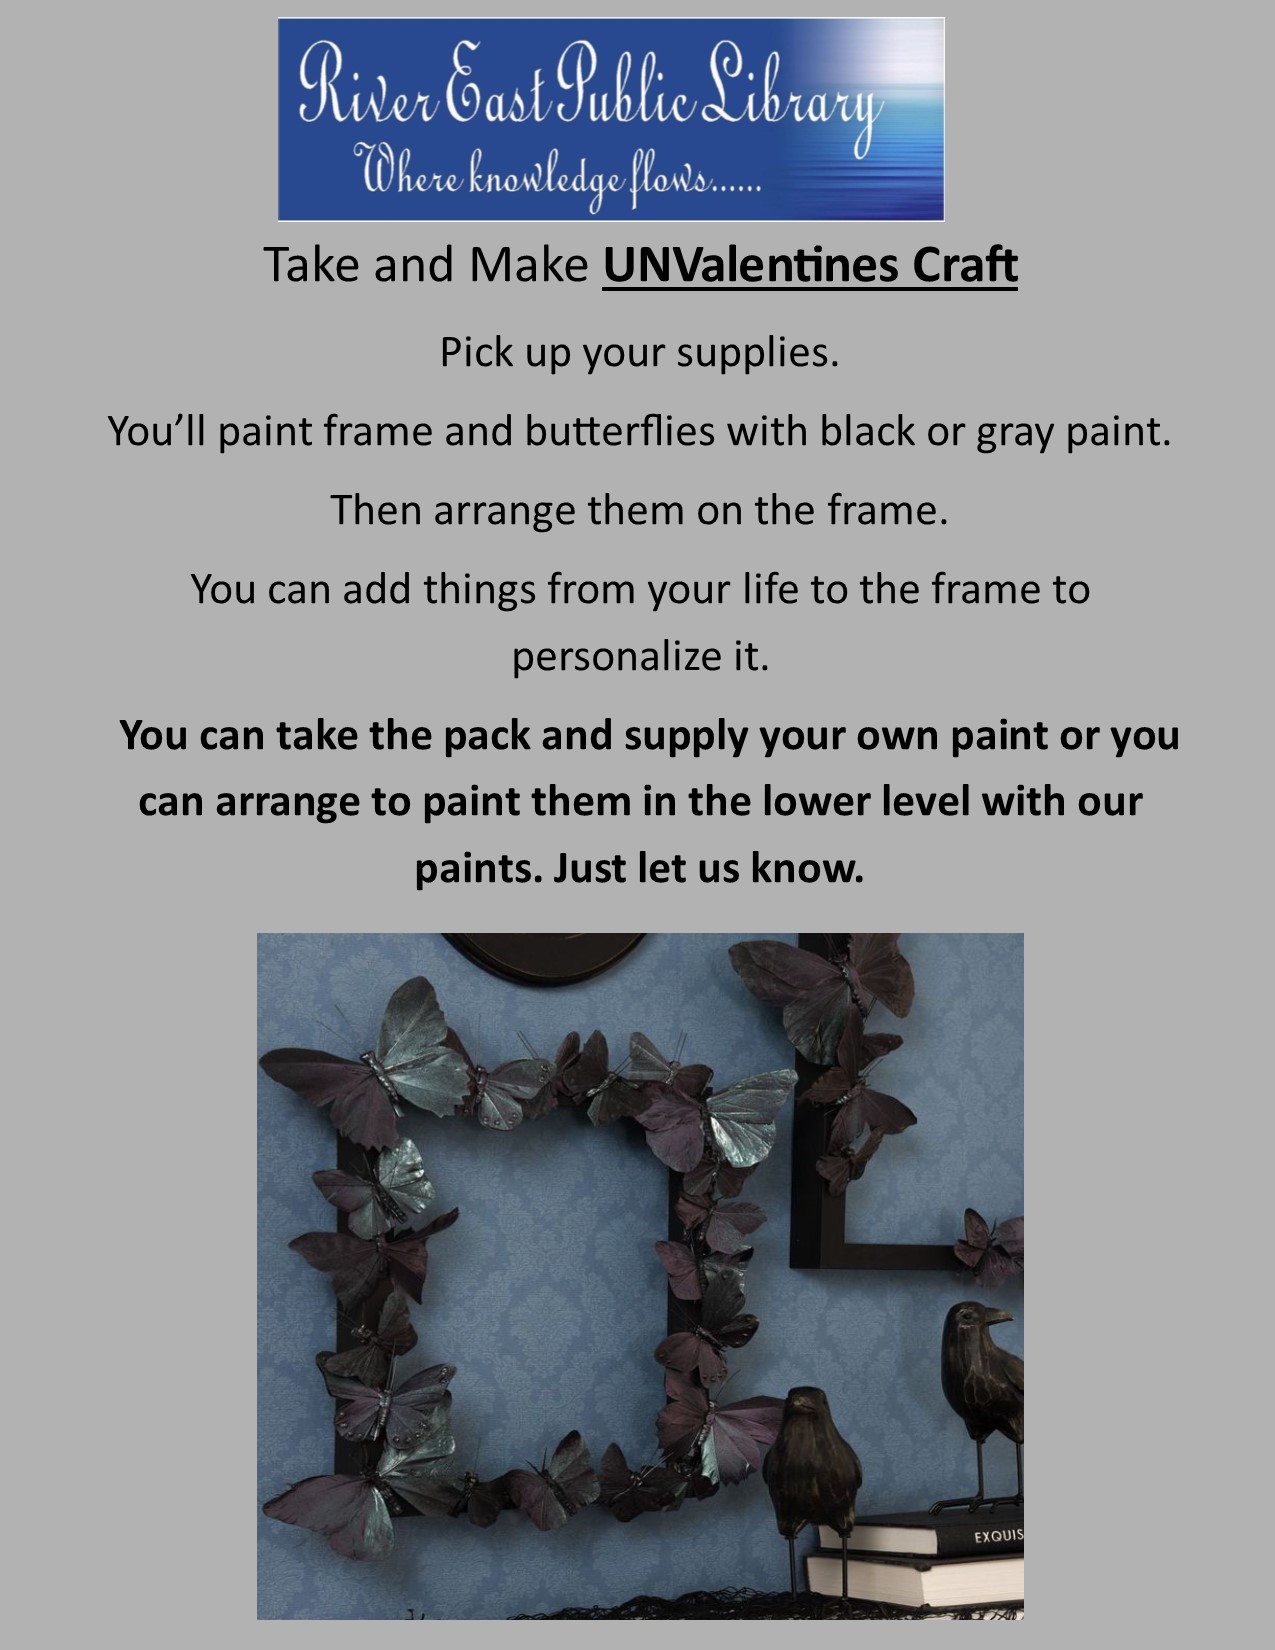 Poster advertising our Unvalentines Craft